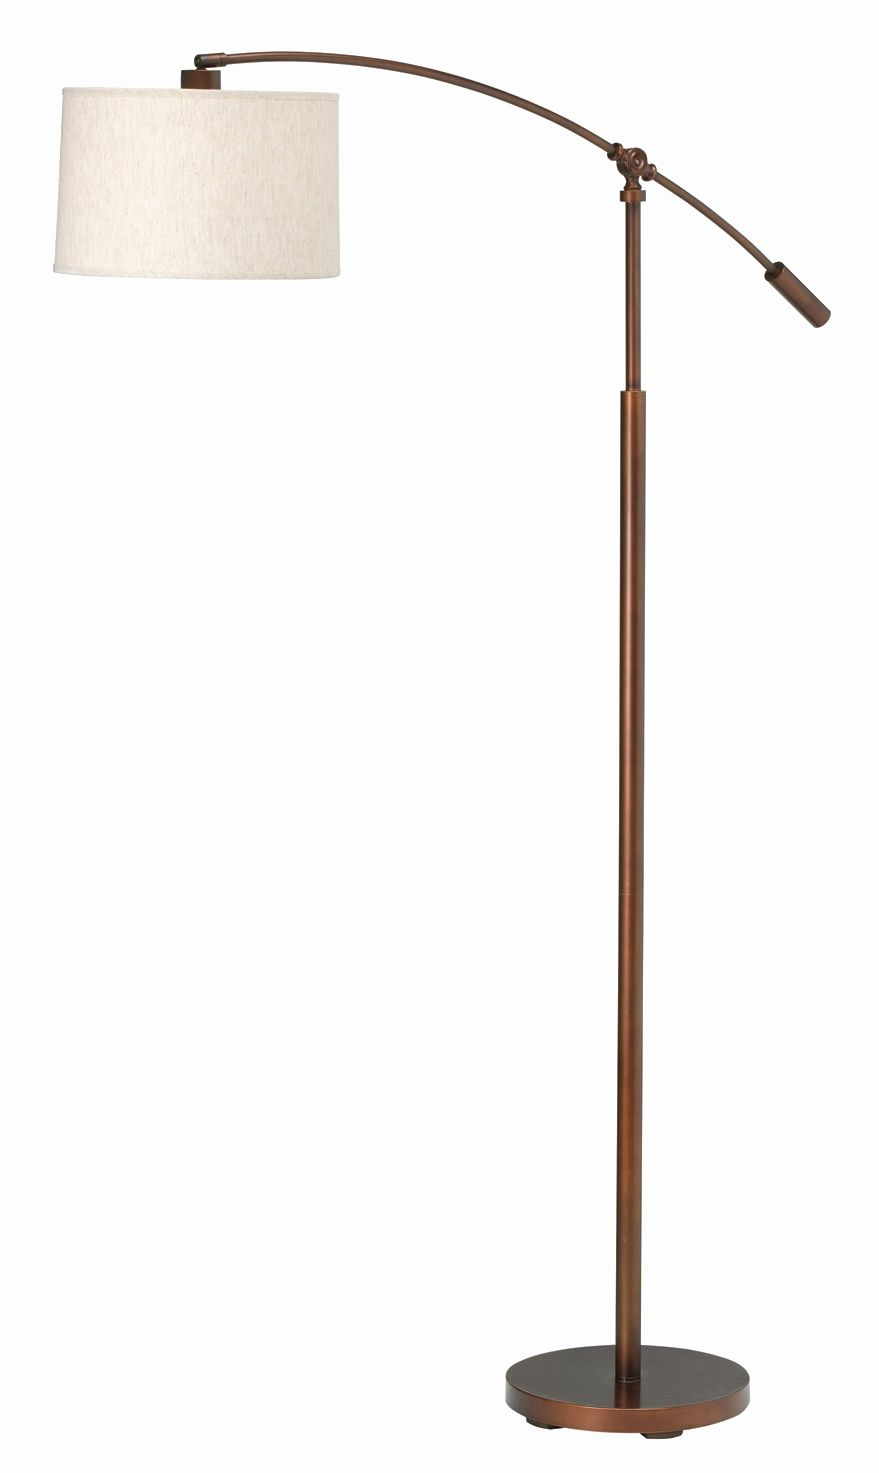 Floor Lamps For Reading And Sewing Walmart Floor Lamps pertaining to size 879 X 1473